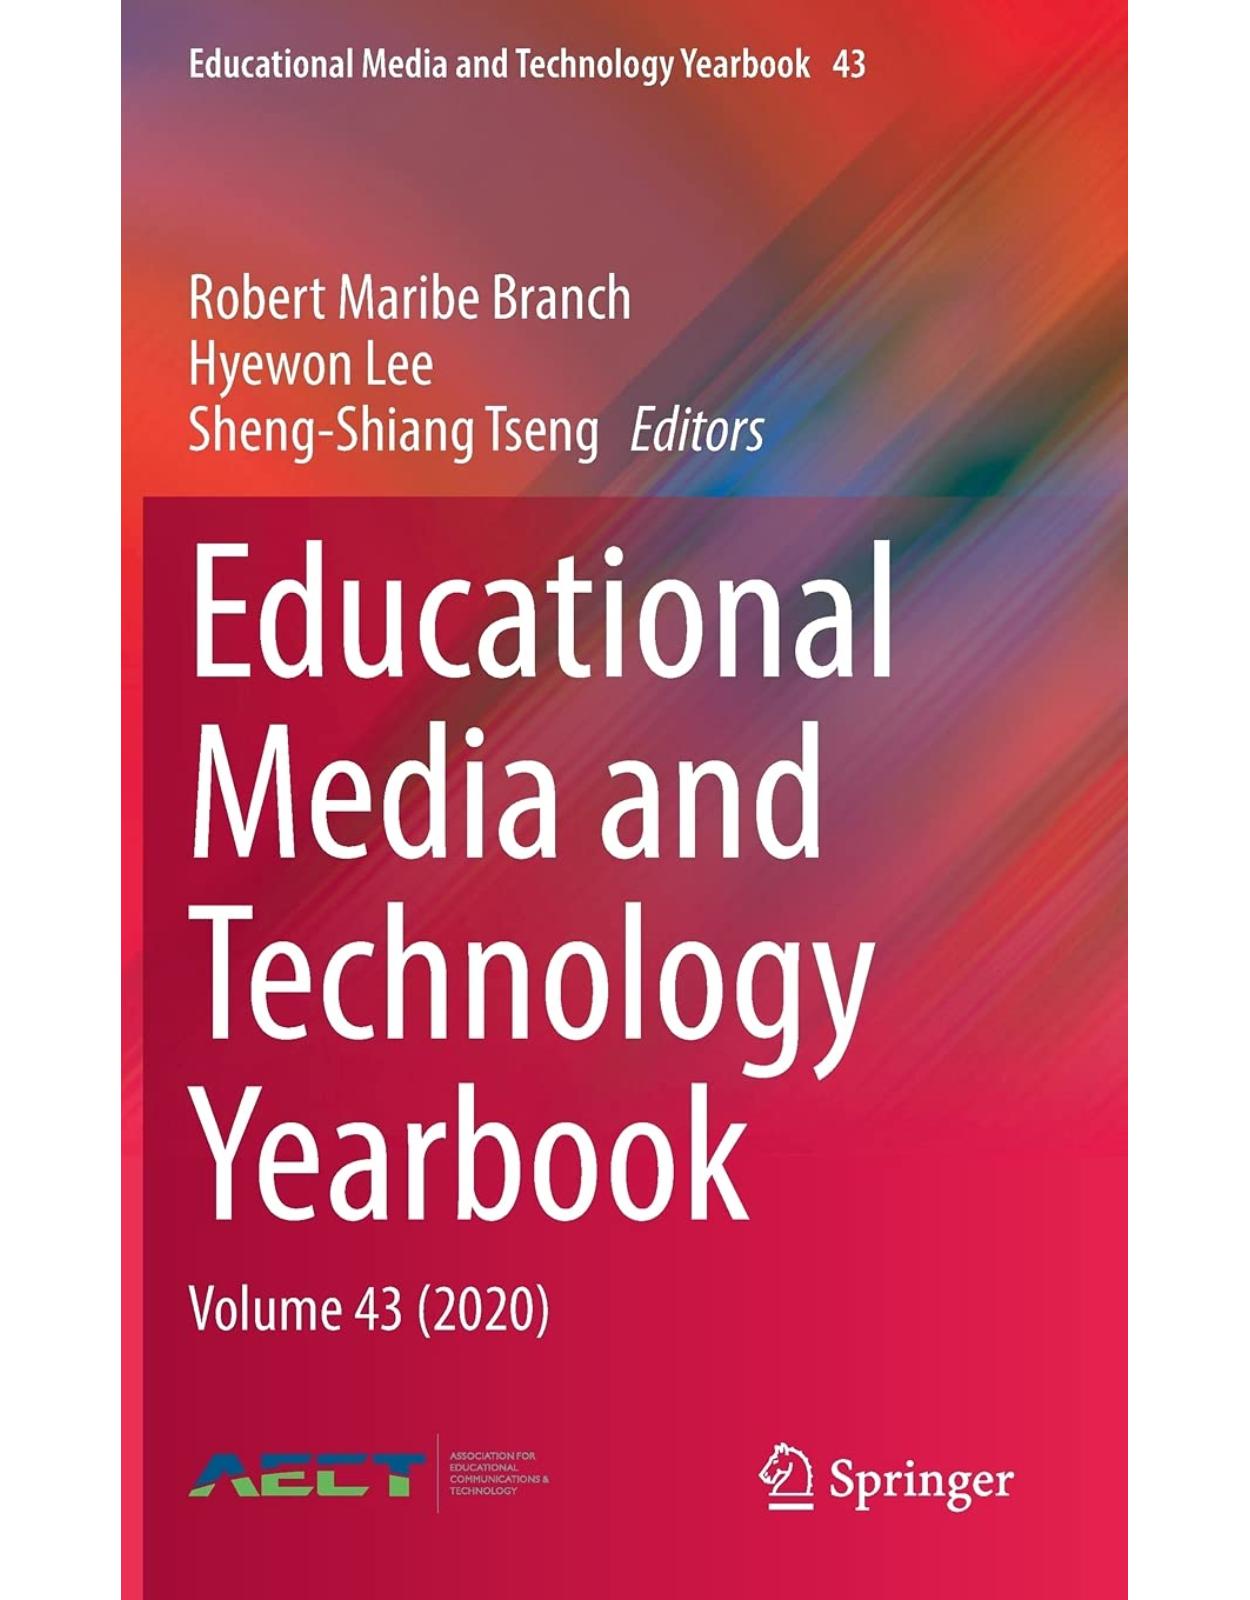 Educational Media and Technology Yearbook: Volume 43